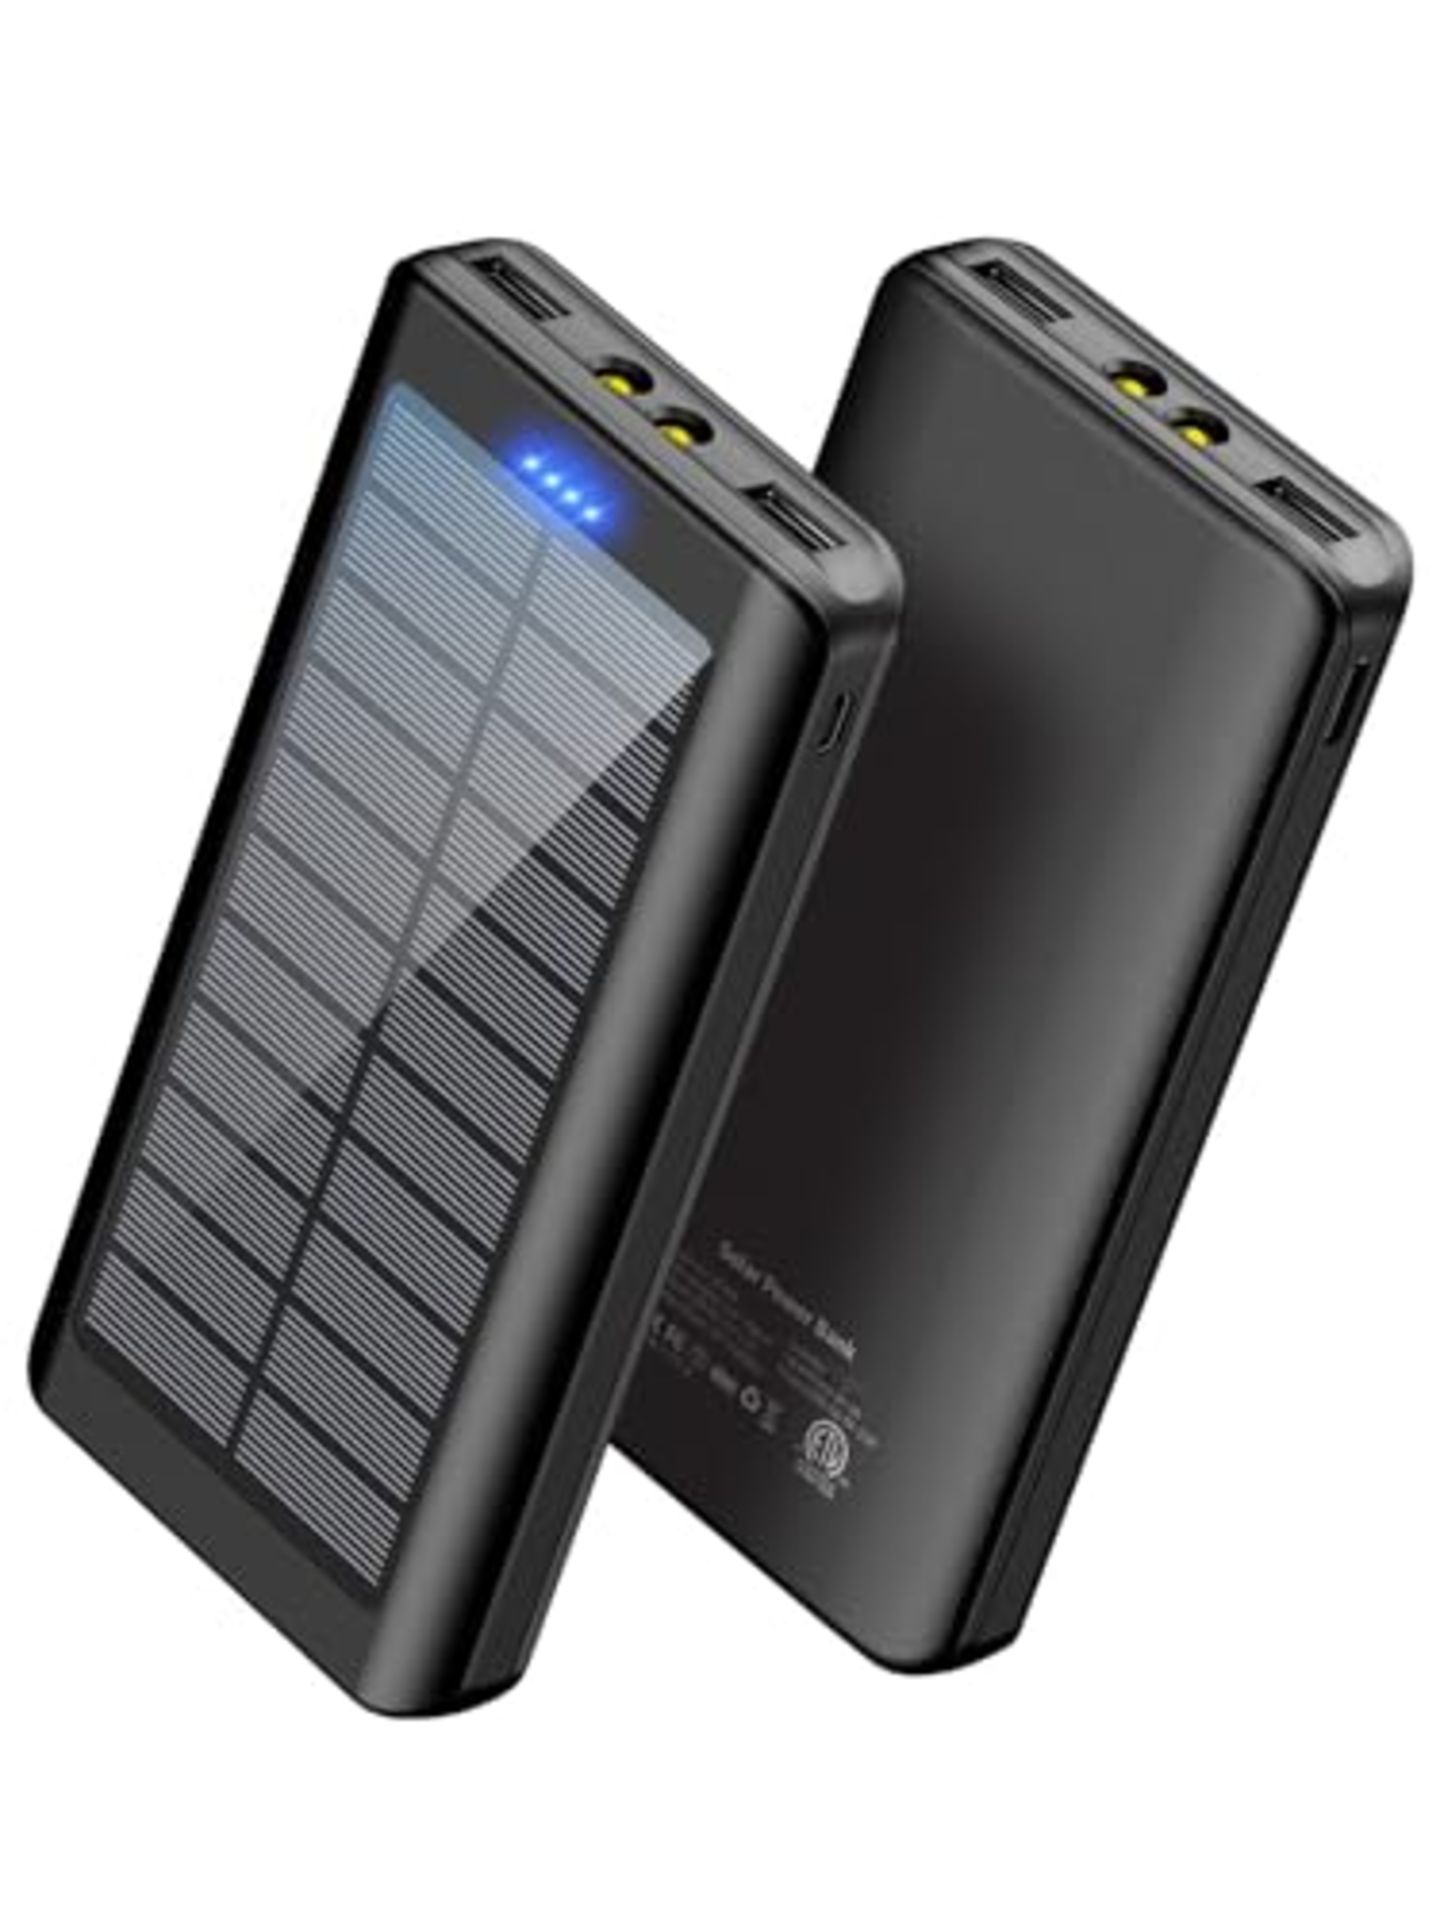 Solar Powerbank 30000mAh External Battery: Power Bank Mobile Outdoor Portable Charger - Image 4 of 6